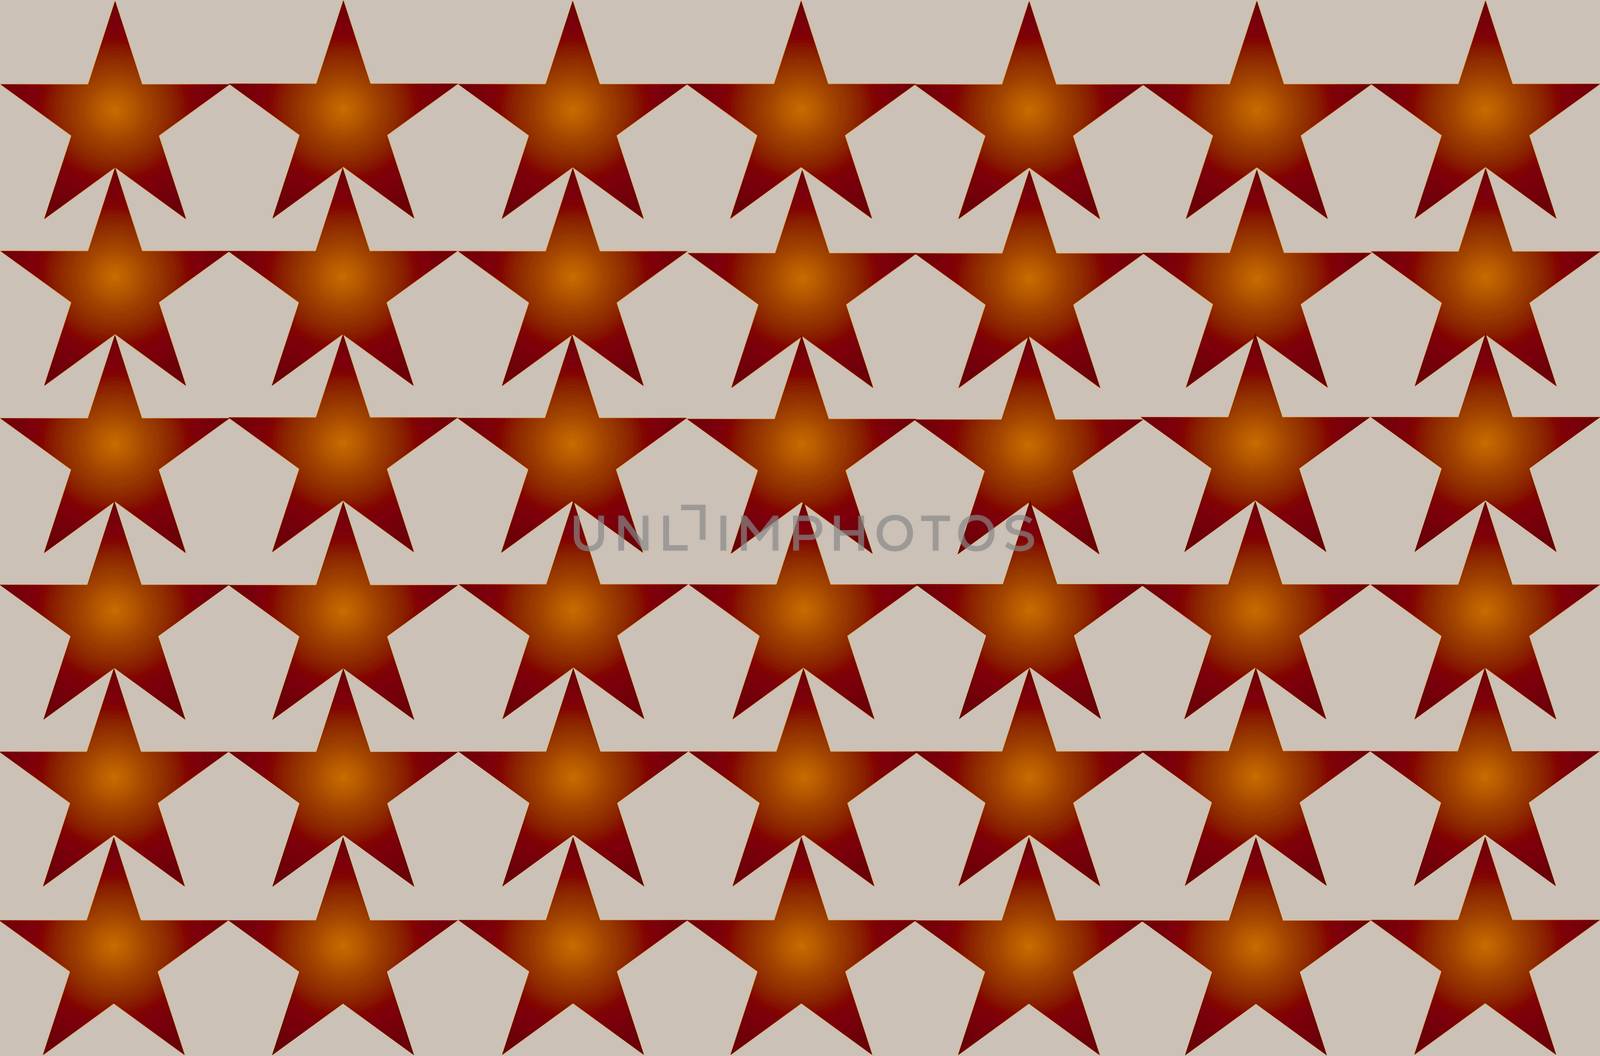 Red Shaded Blurred Star Pattern on white background Seamless Illustration. Modern Design. Can be used for business, website and other.